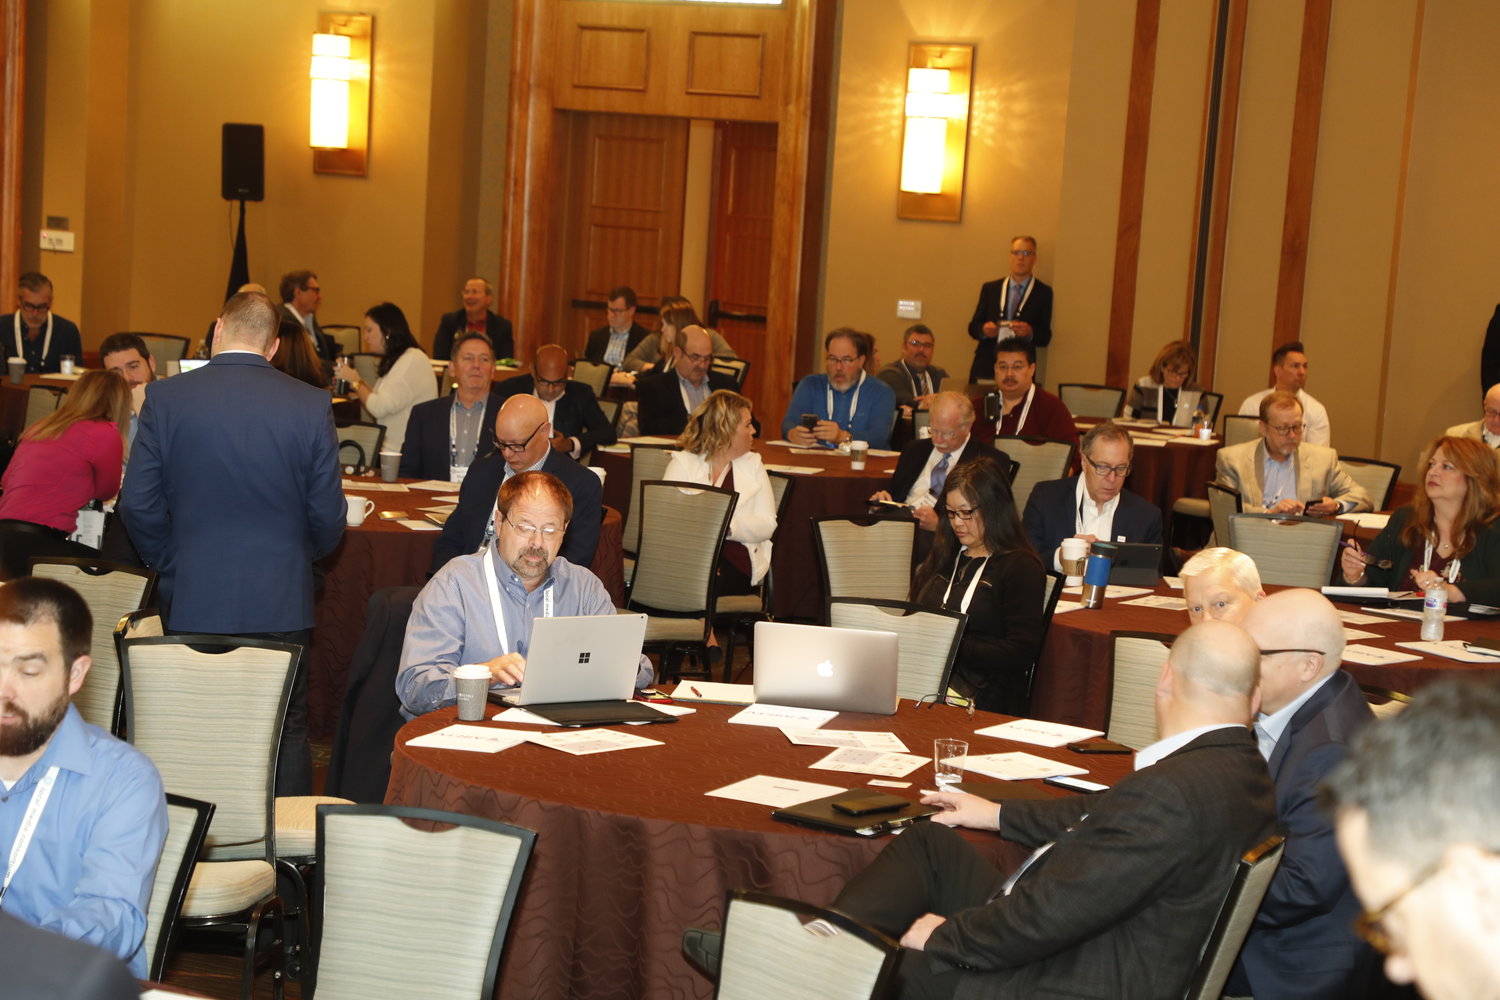 Tuesday photos of the 2020 Mega-Conference 2020 at the Omni Hotel in Fort Worth, Texas, Feb. 18, 2020. (Photo by Bob Booth)